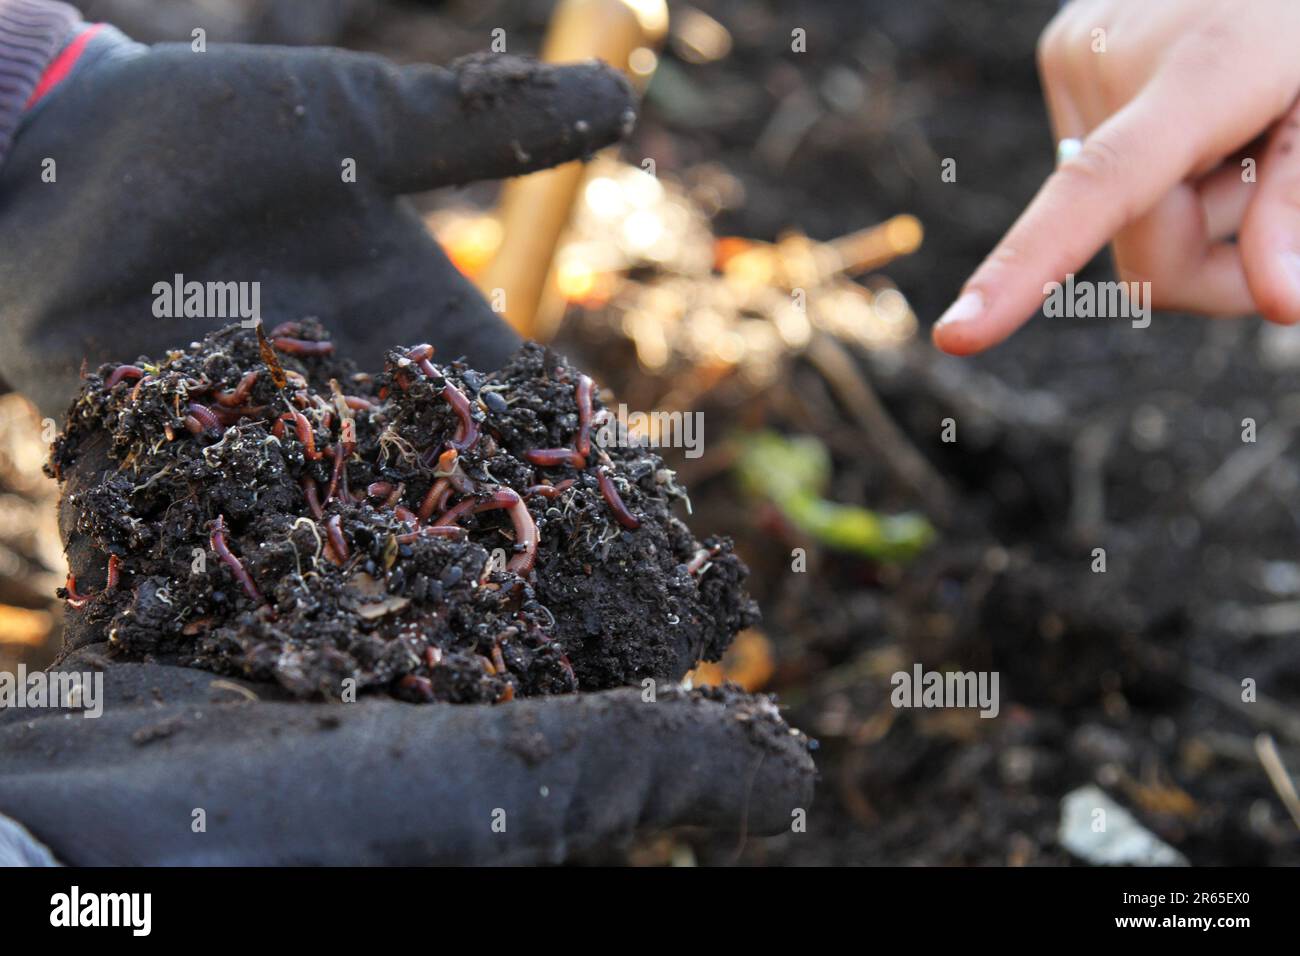 A gardener wearing gloves holding a clump or ball of healthy dark soil loaded with earth worms composing food scraps. A student or collegue pointing a Stock Photo